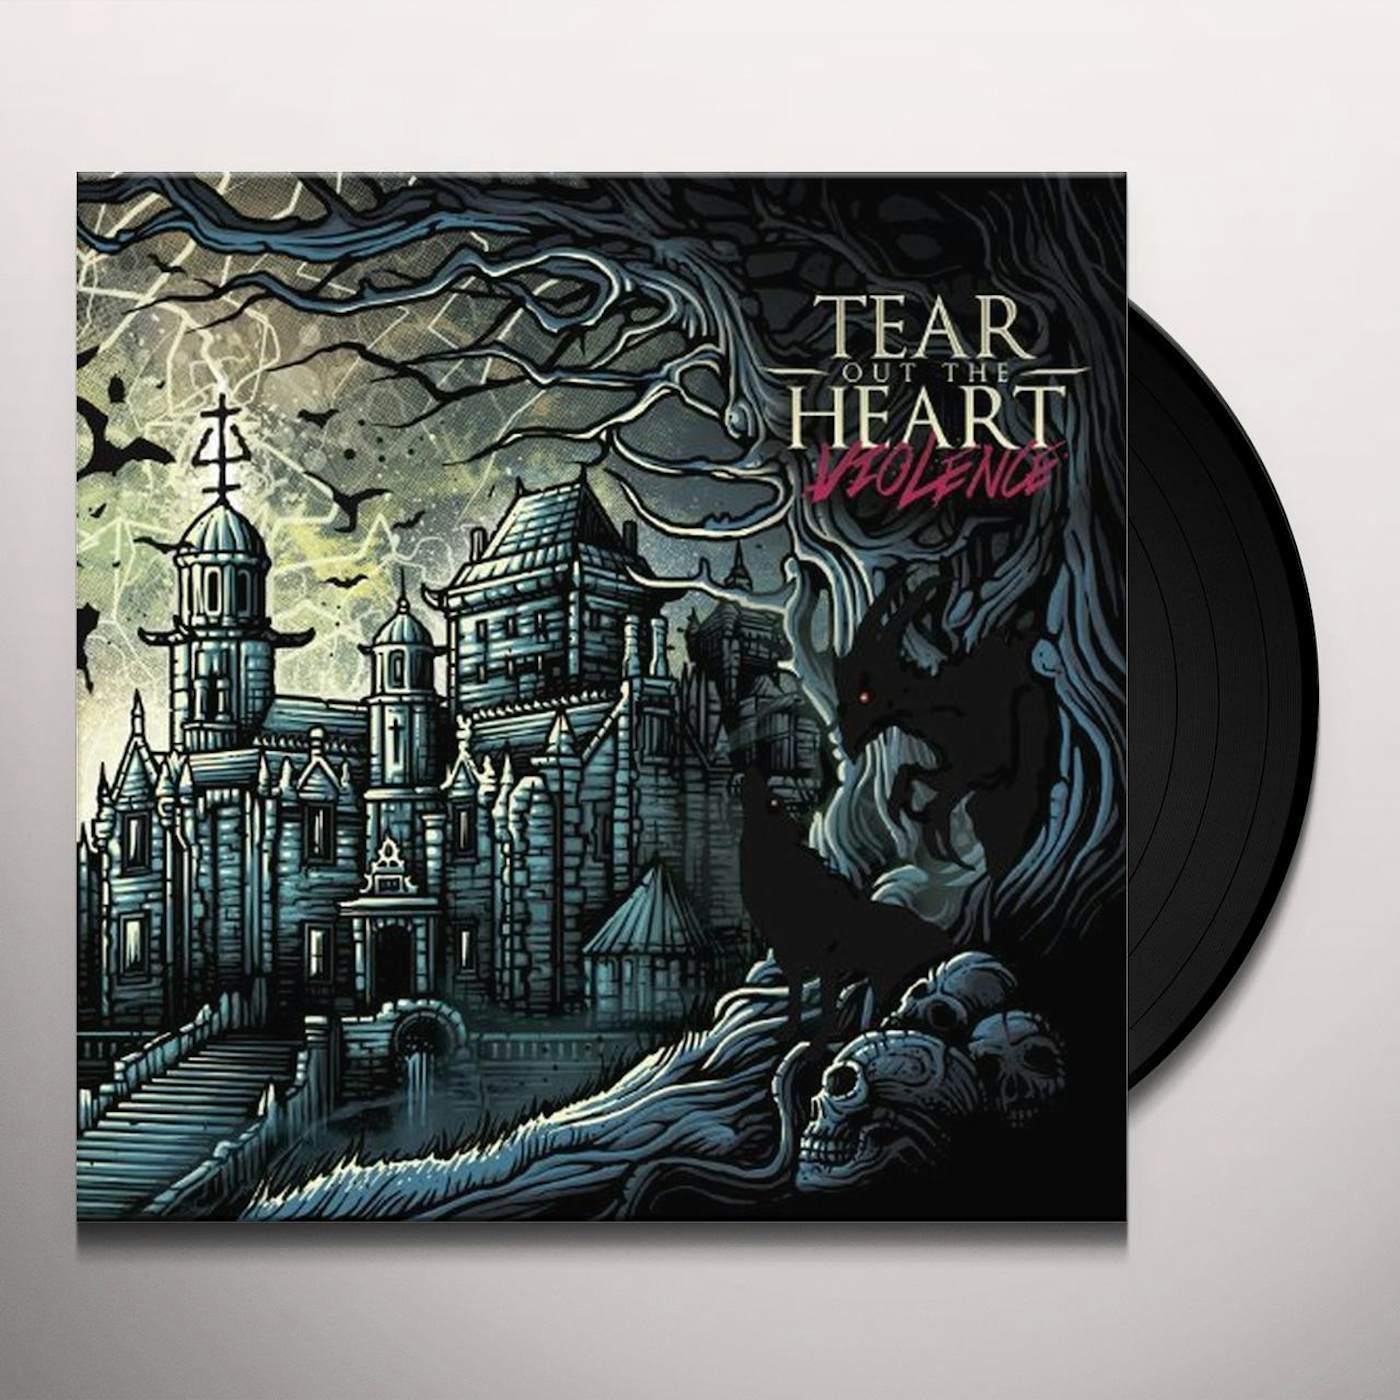 Tear Out The Heart Violence Vinyl Record